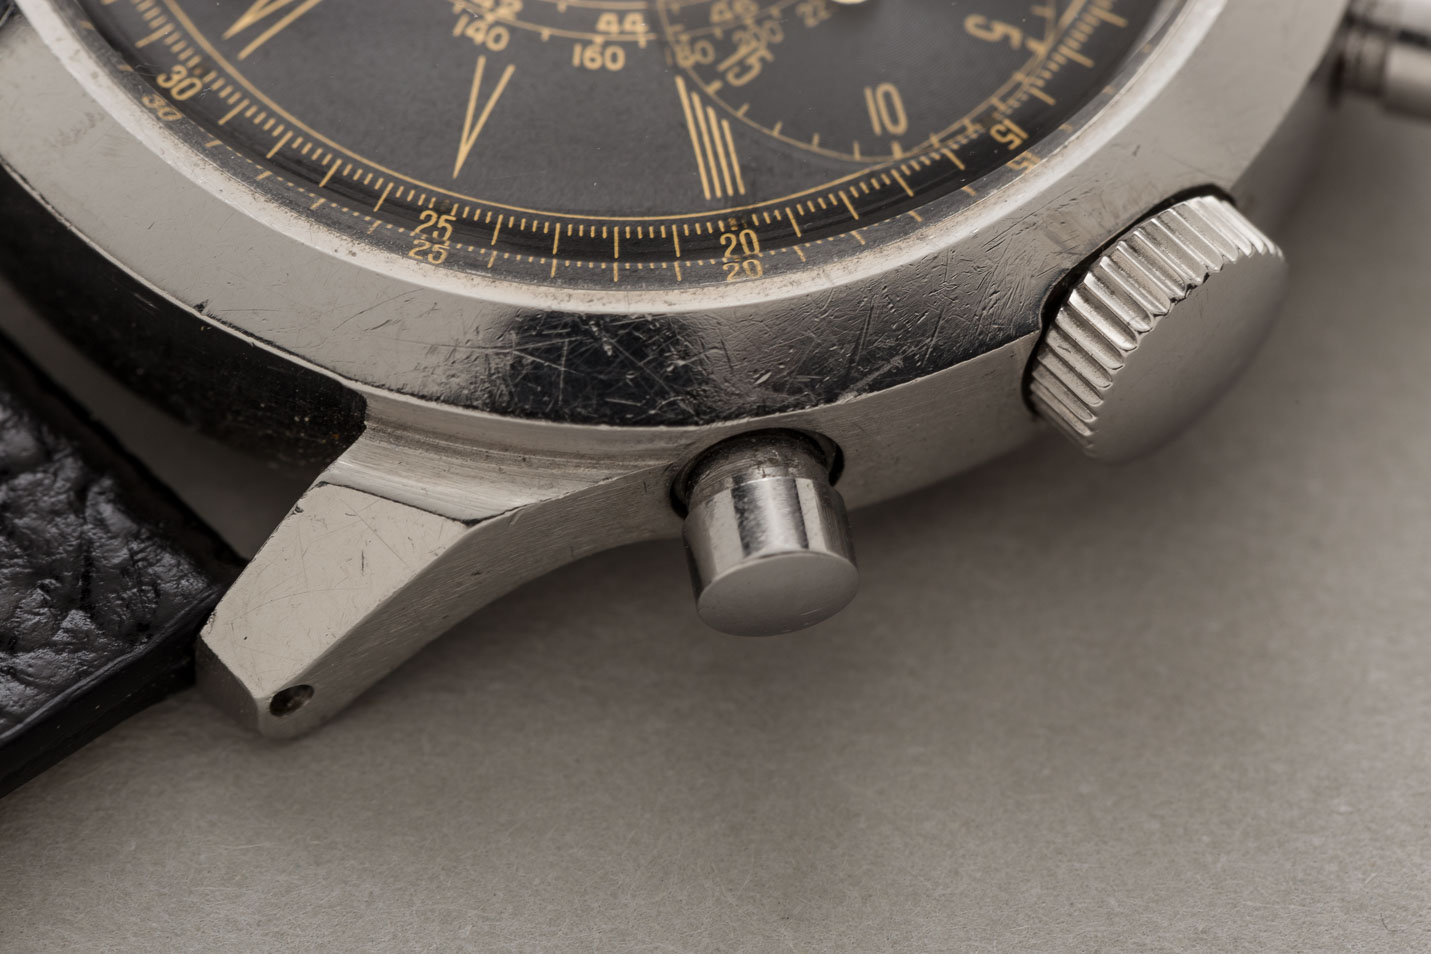 Unver Gilt Dial Spillman Vintage Chronograph - Shuck the Oyster Vintage  Watches